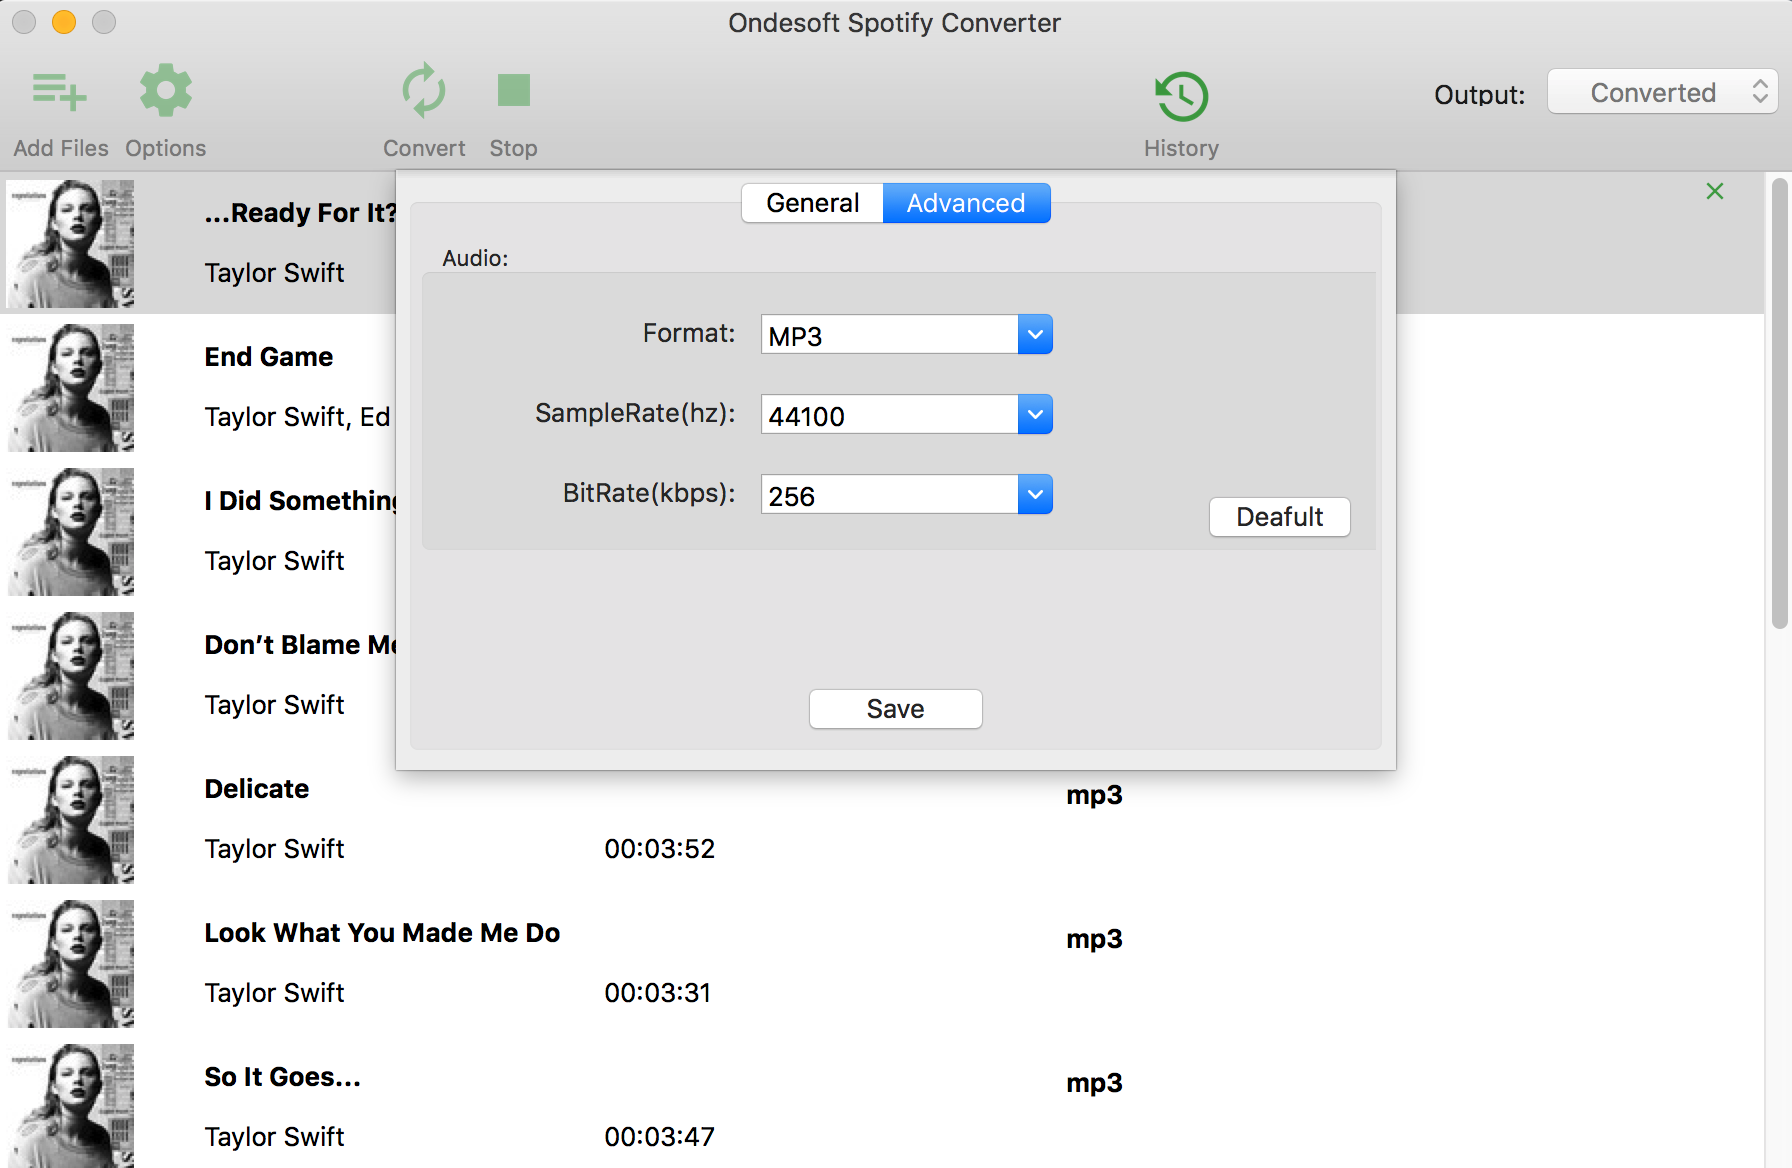 free spotify music converter for mac